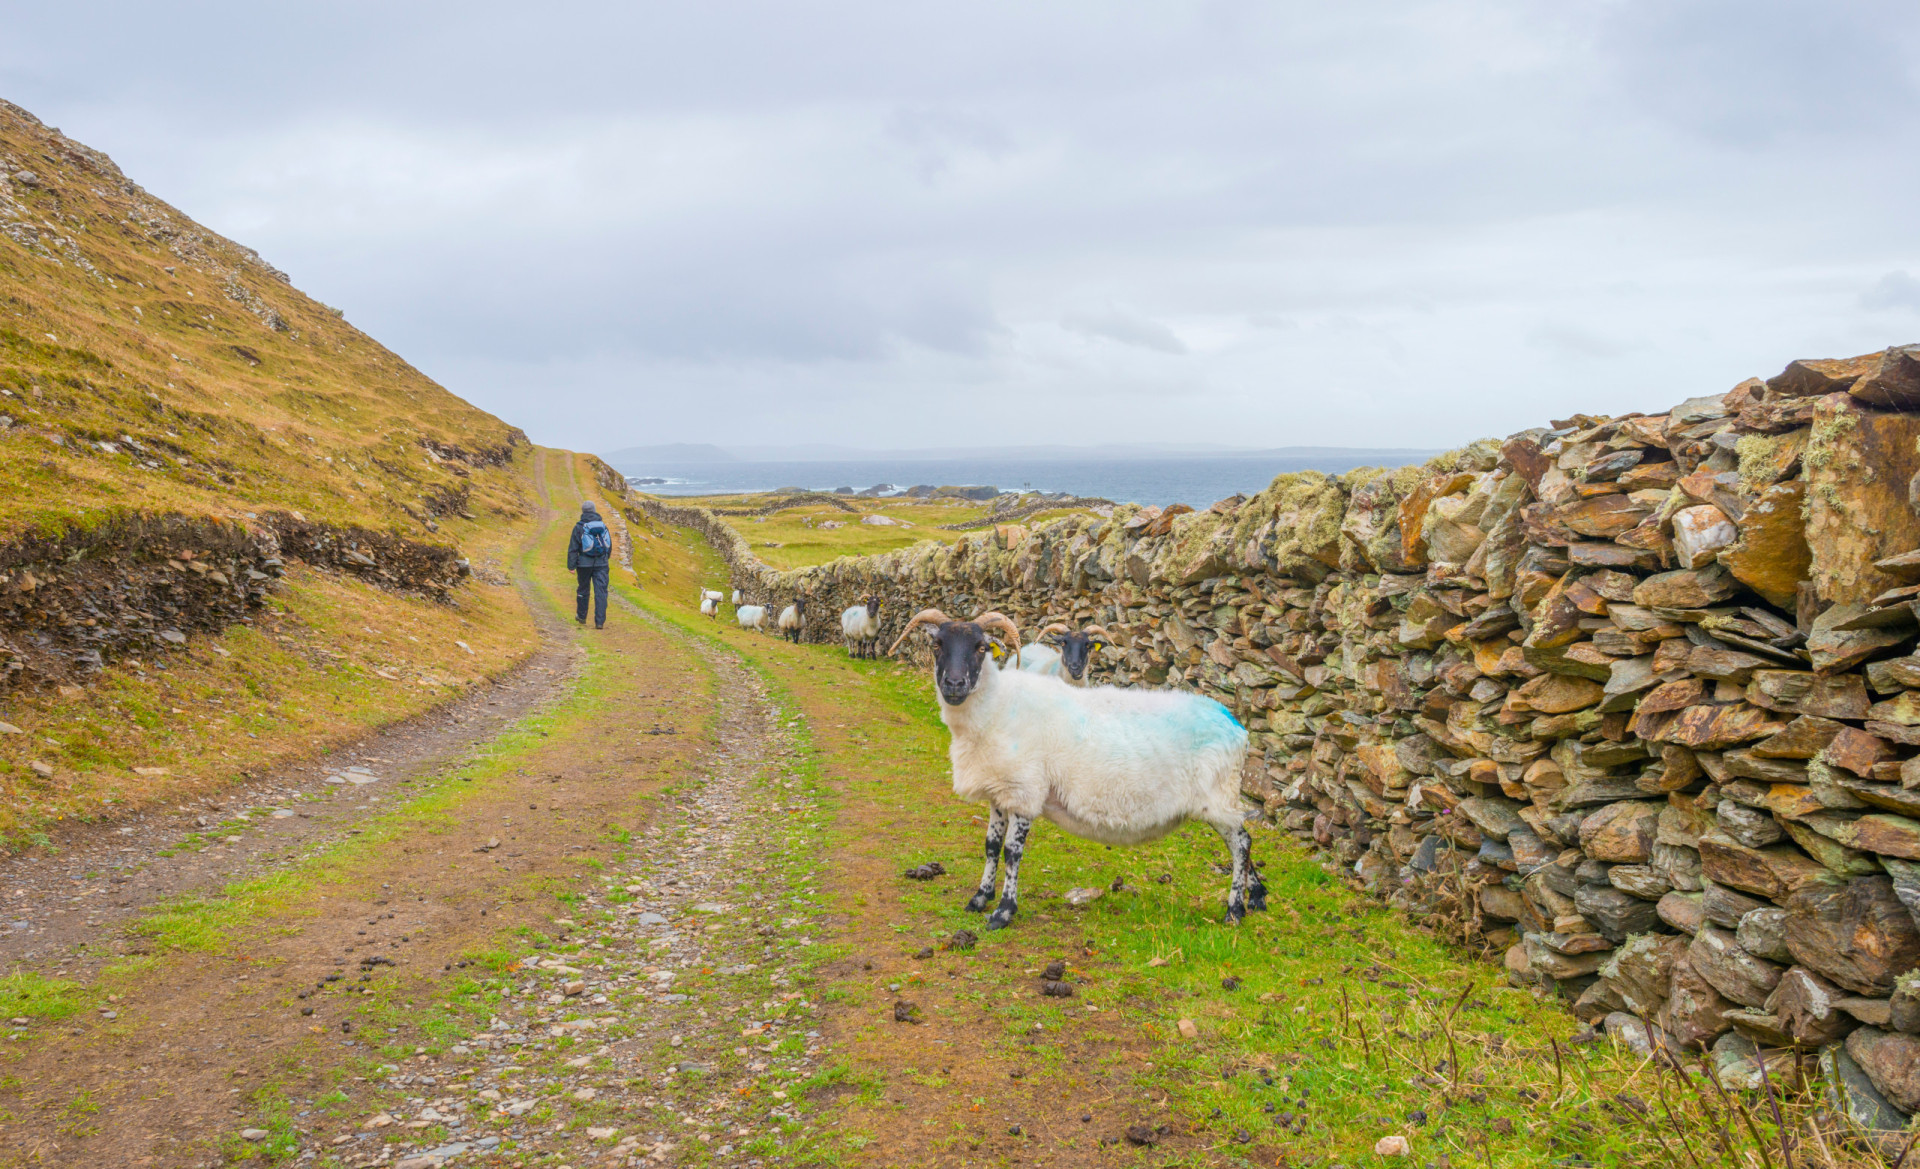 <p>Legend has it a woman and a cow emerge from the lake on Inishbofin every seven years to forewarn of impending disaster. While it's unlikely any visitors will witness this, you can take one of the many looping walks where you'll probably catch a glimpse of the local sheep.</p>